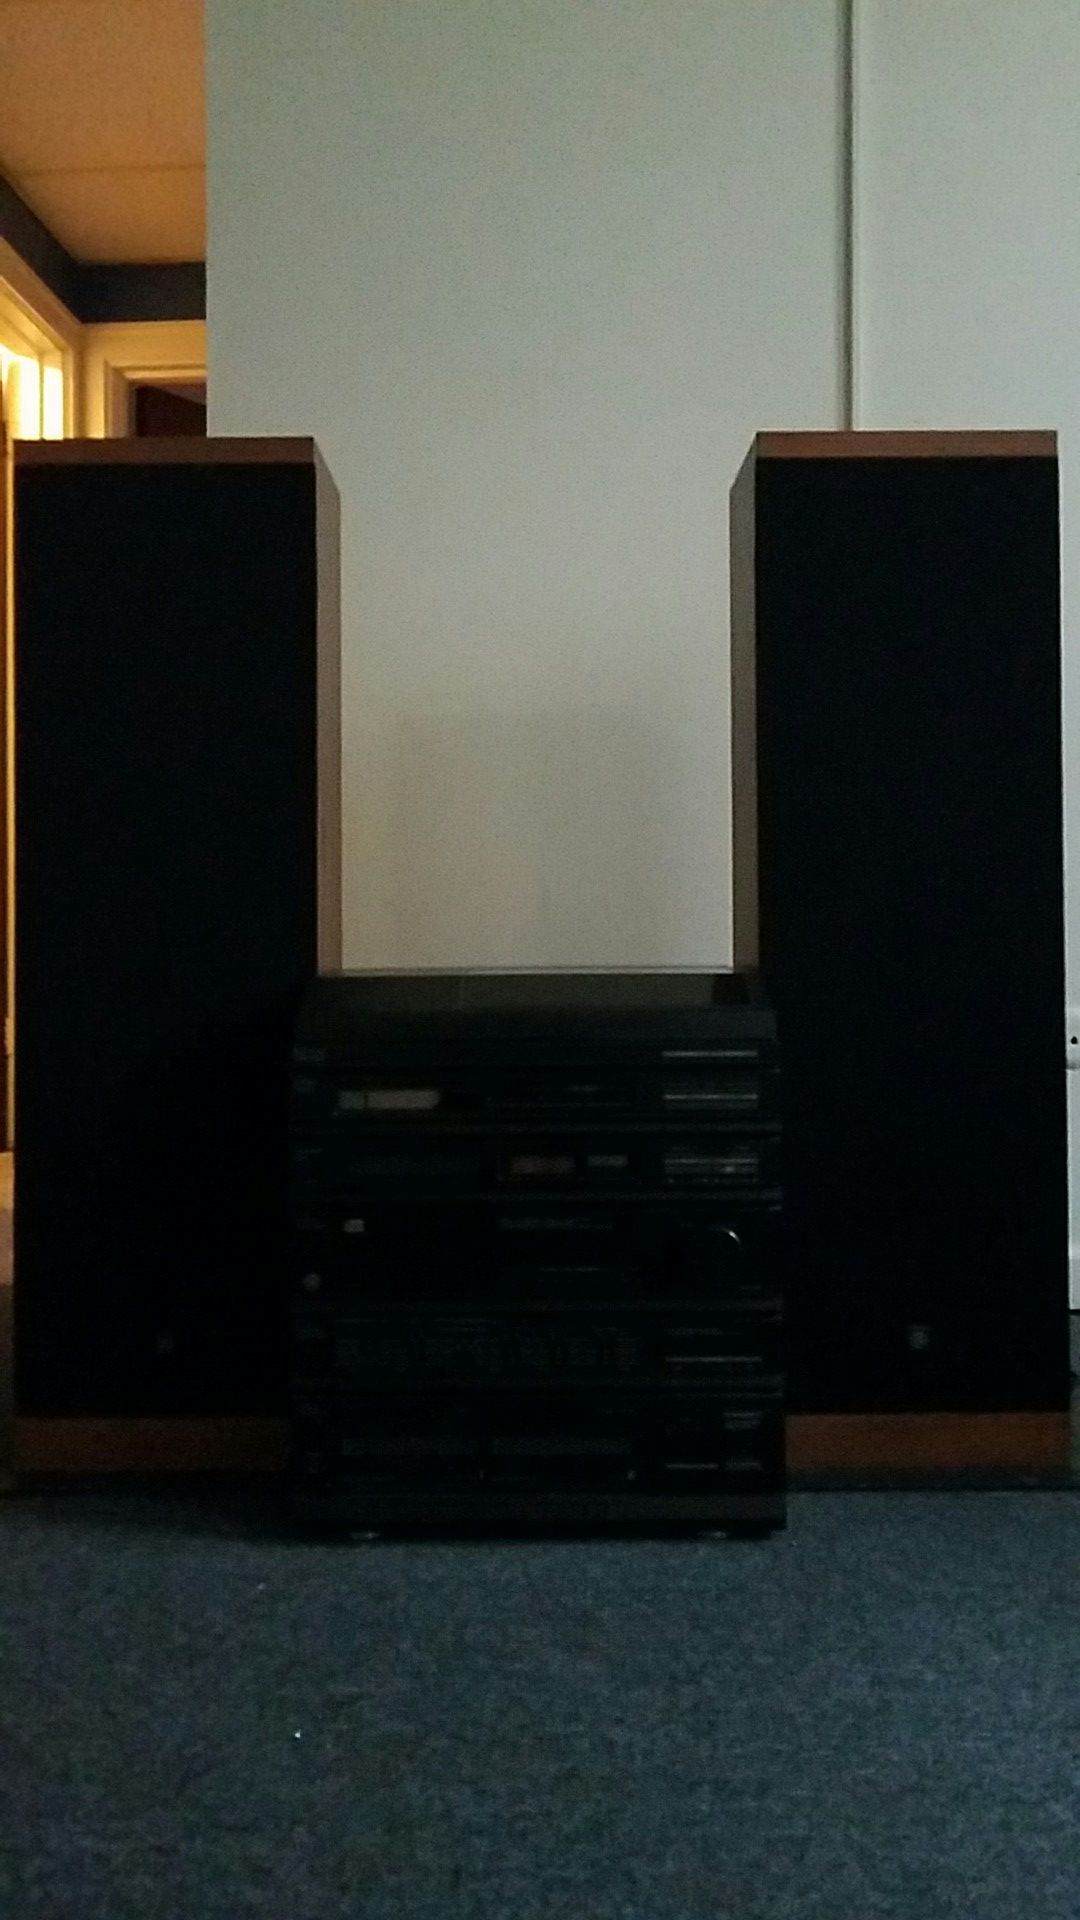 1991 Integrated Stereo System